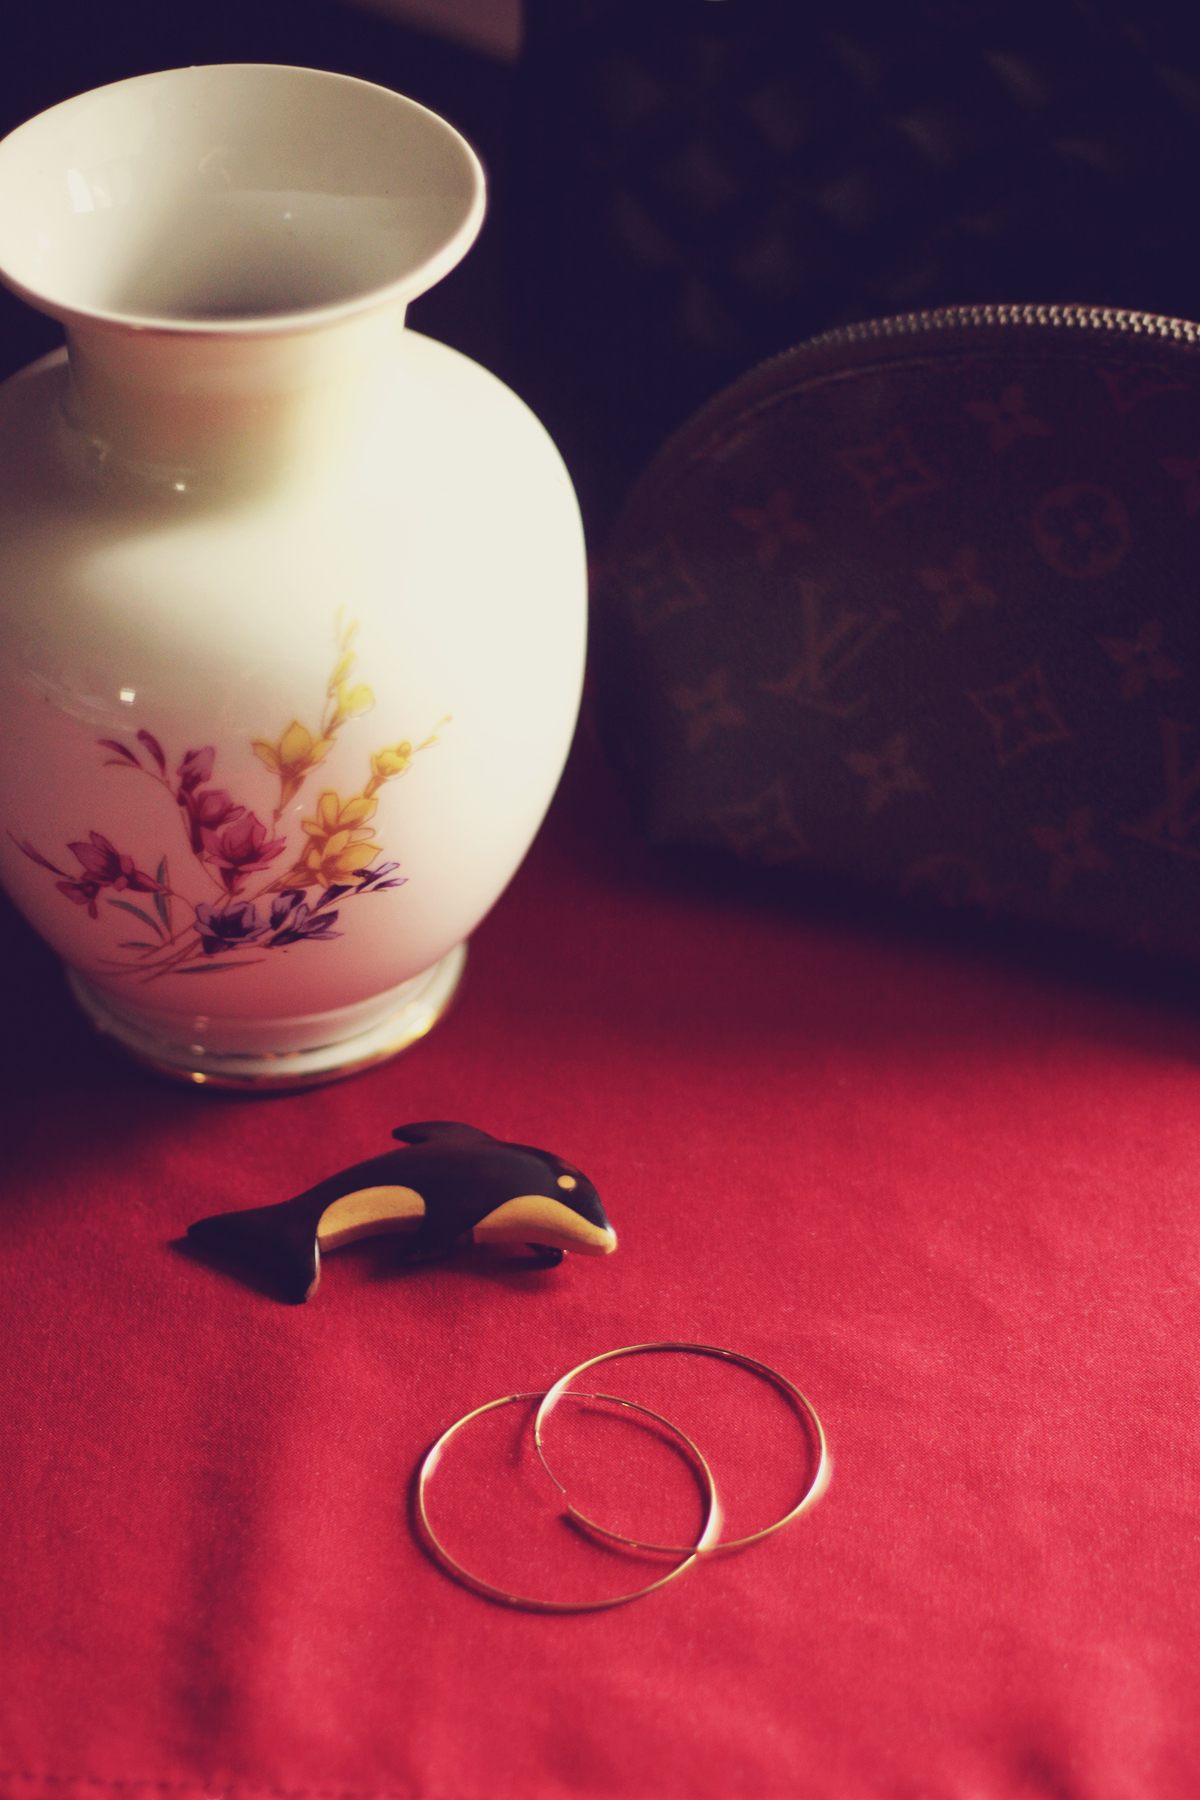 hoop earrings, dolphin brooch, louis vuitton travel pouch, vintage porcelain vase, old mansion